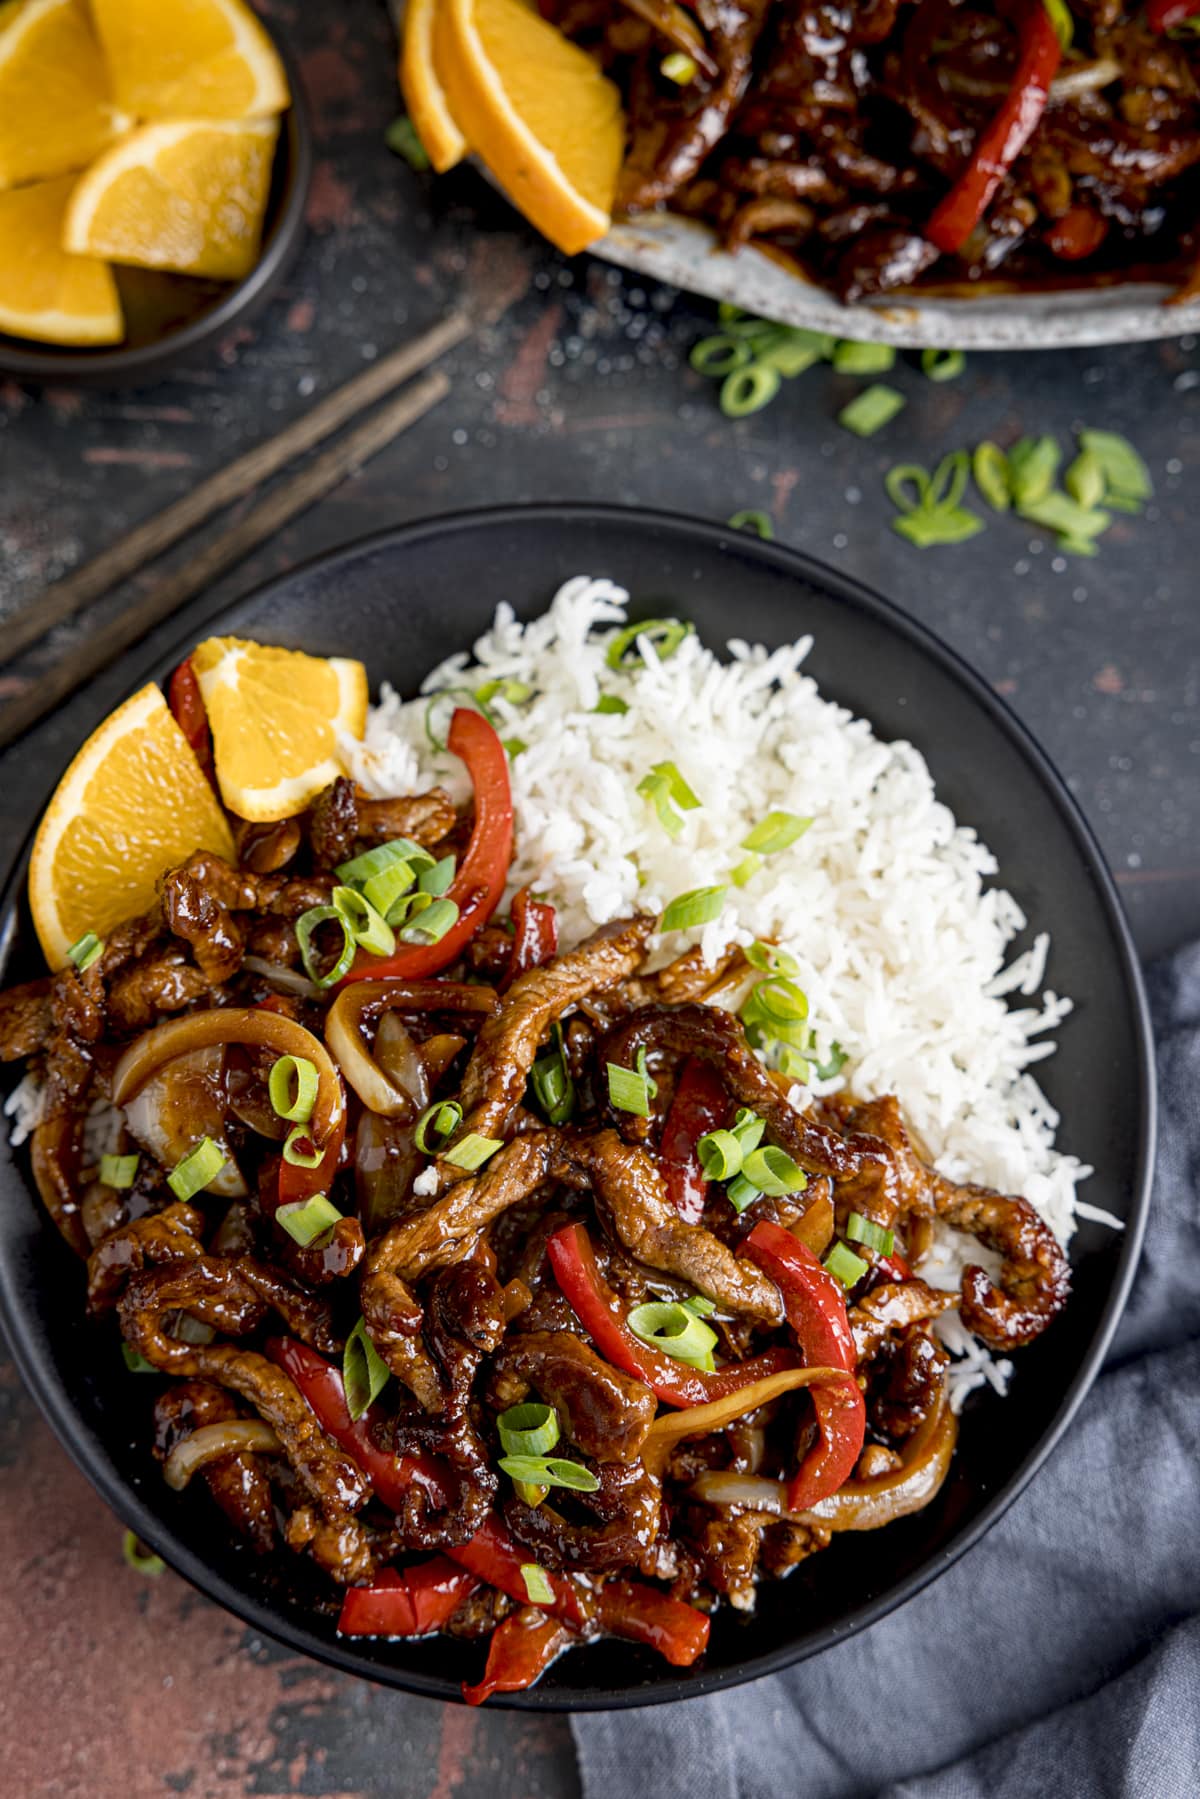 Overhead of crispy orange beef with peppers and onions on a dark plate with boiled rice. There are slices of orange and spring onions scattered around and a pair of chopsticks next to the plate.